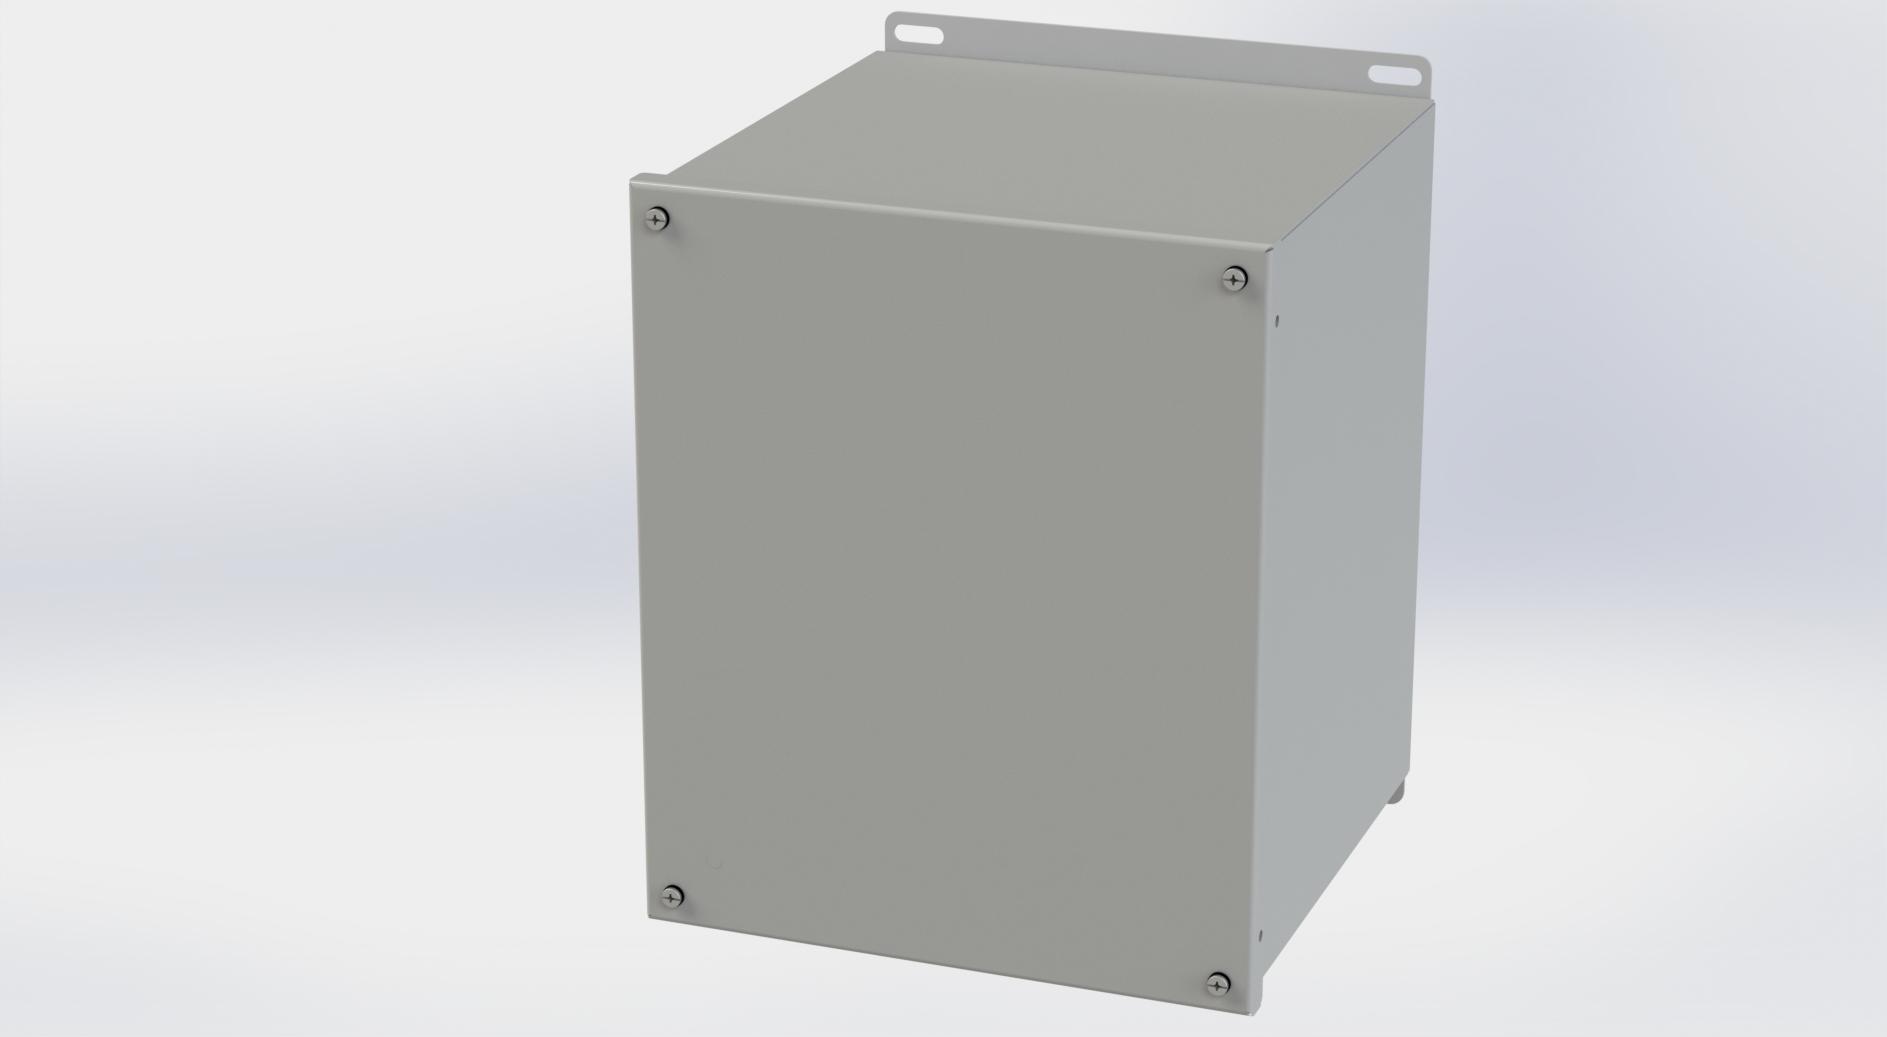 Saginaw Control SCE-121010SC SC Enclosure, Height:12.13", Width:10.00", Depth:10.00", ANSI-61 gray powder coating inside and out.  Optional sub-panels are powder coated white.